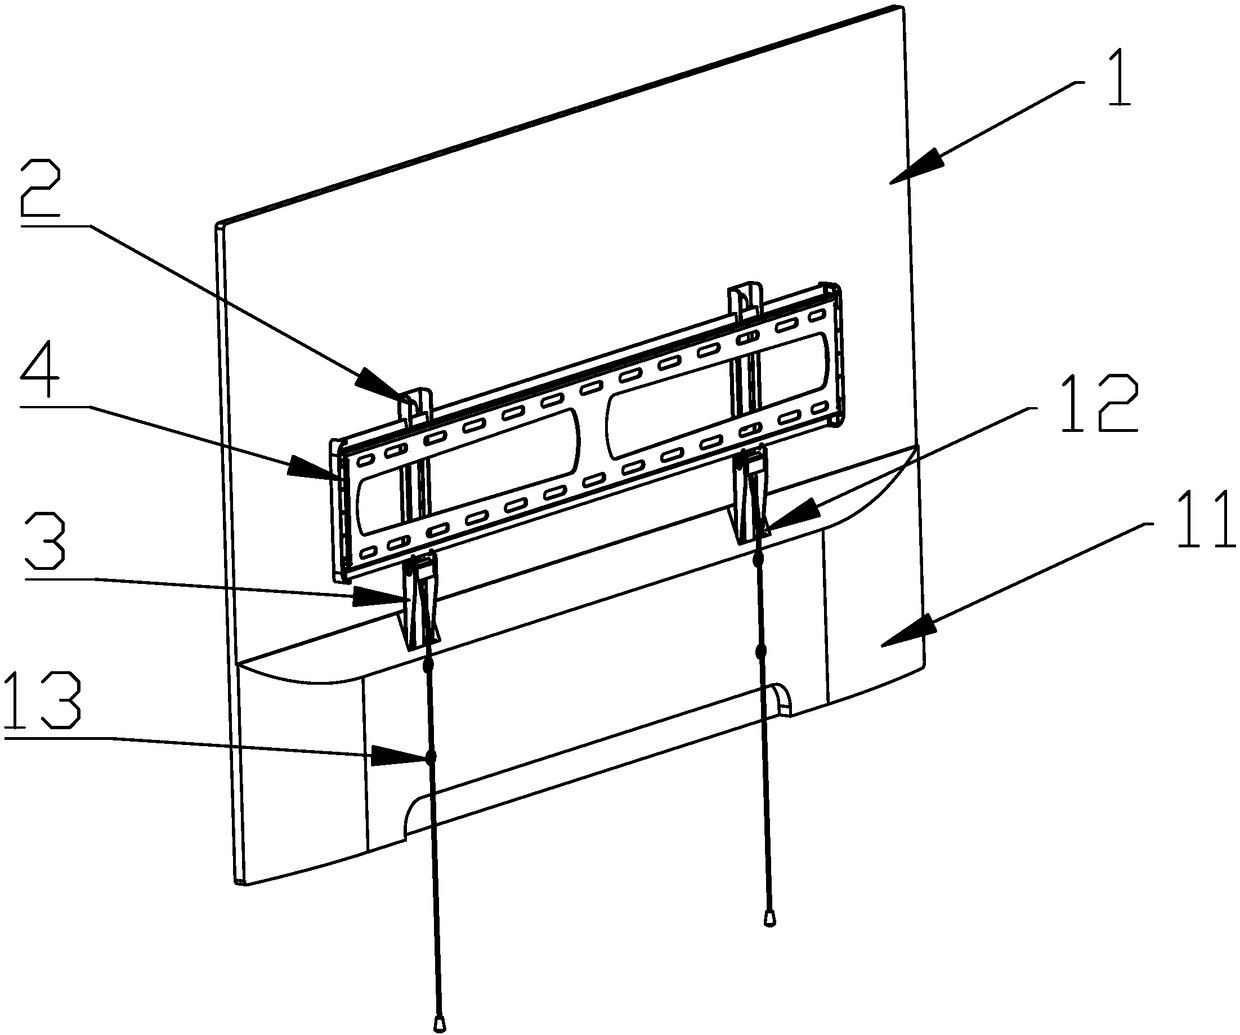 Connecting structure for display and display bracket